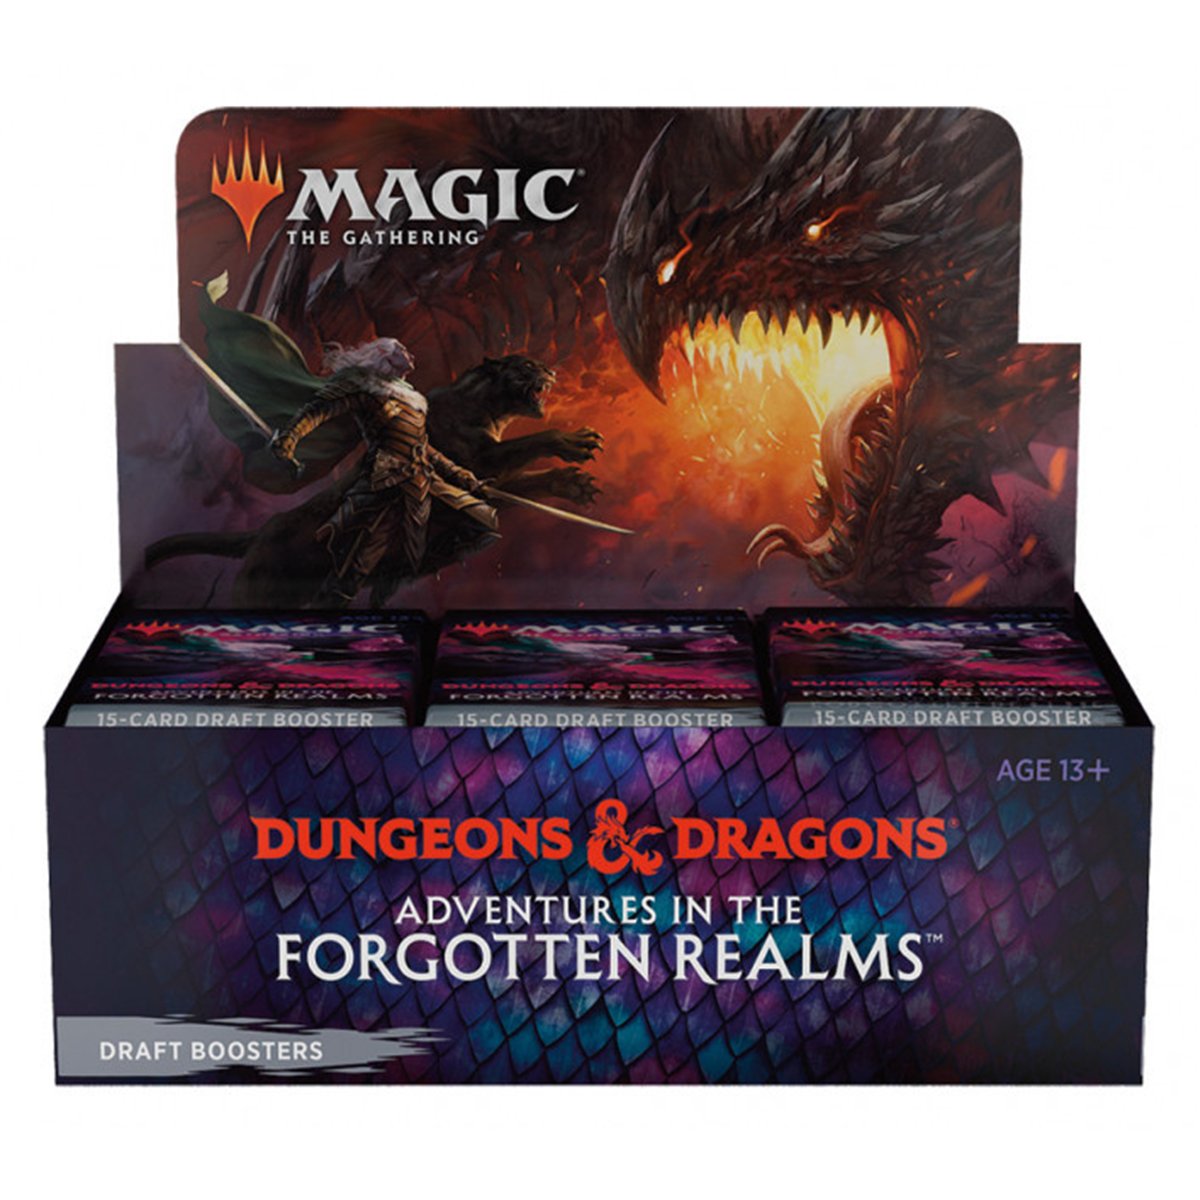 Adventures in the Forgotten Realms D&D Dungeons & Dragons - Full Draft Booster Box - Magic The Gathering - TCG